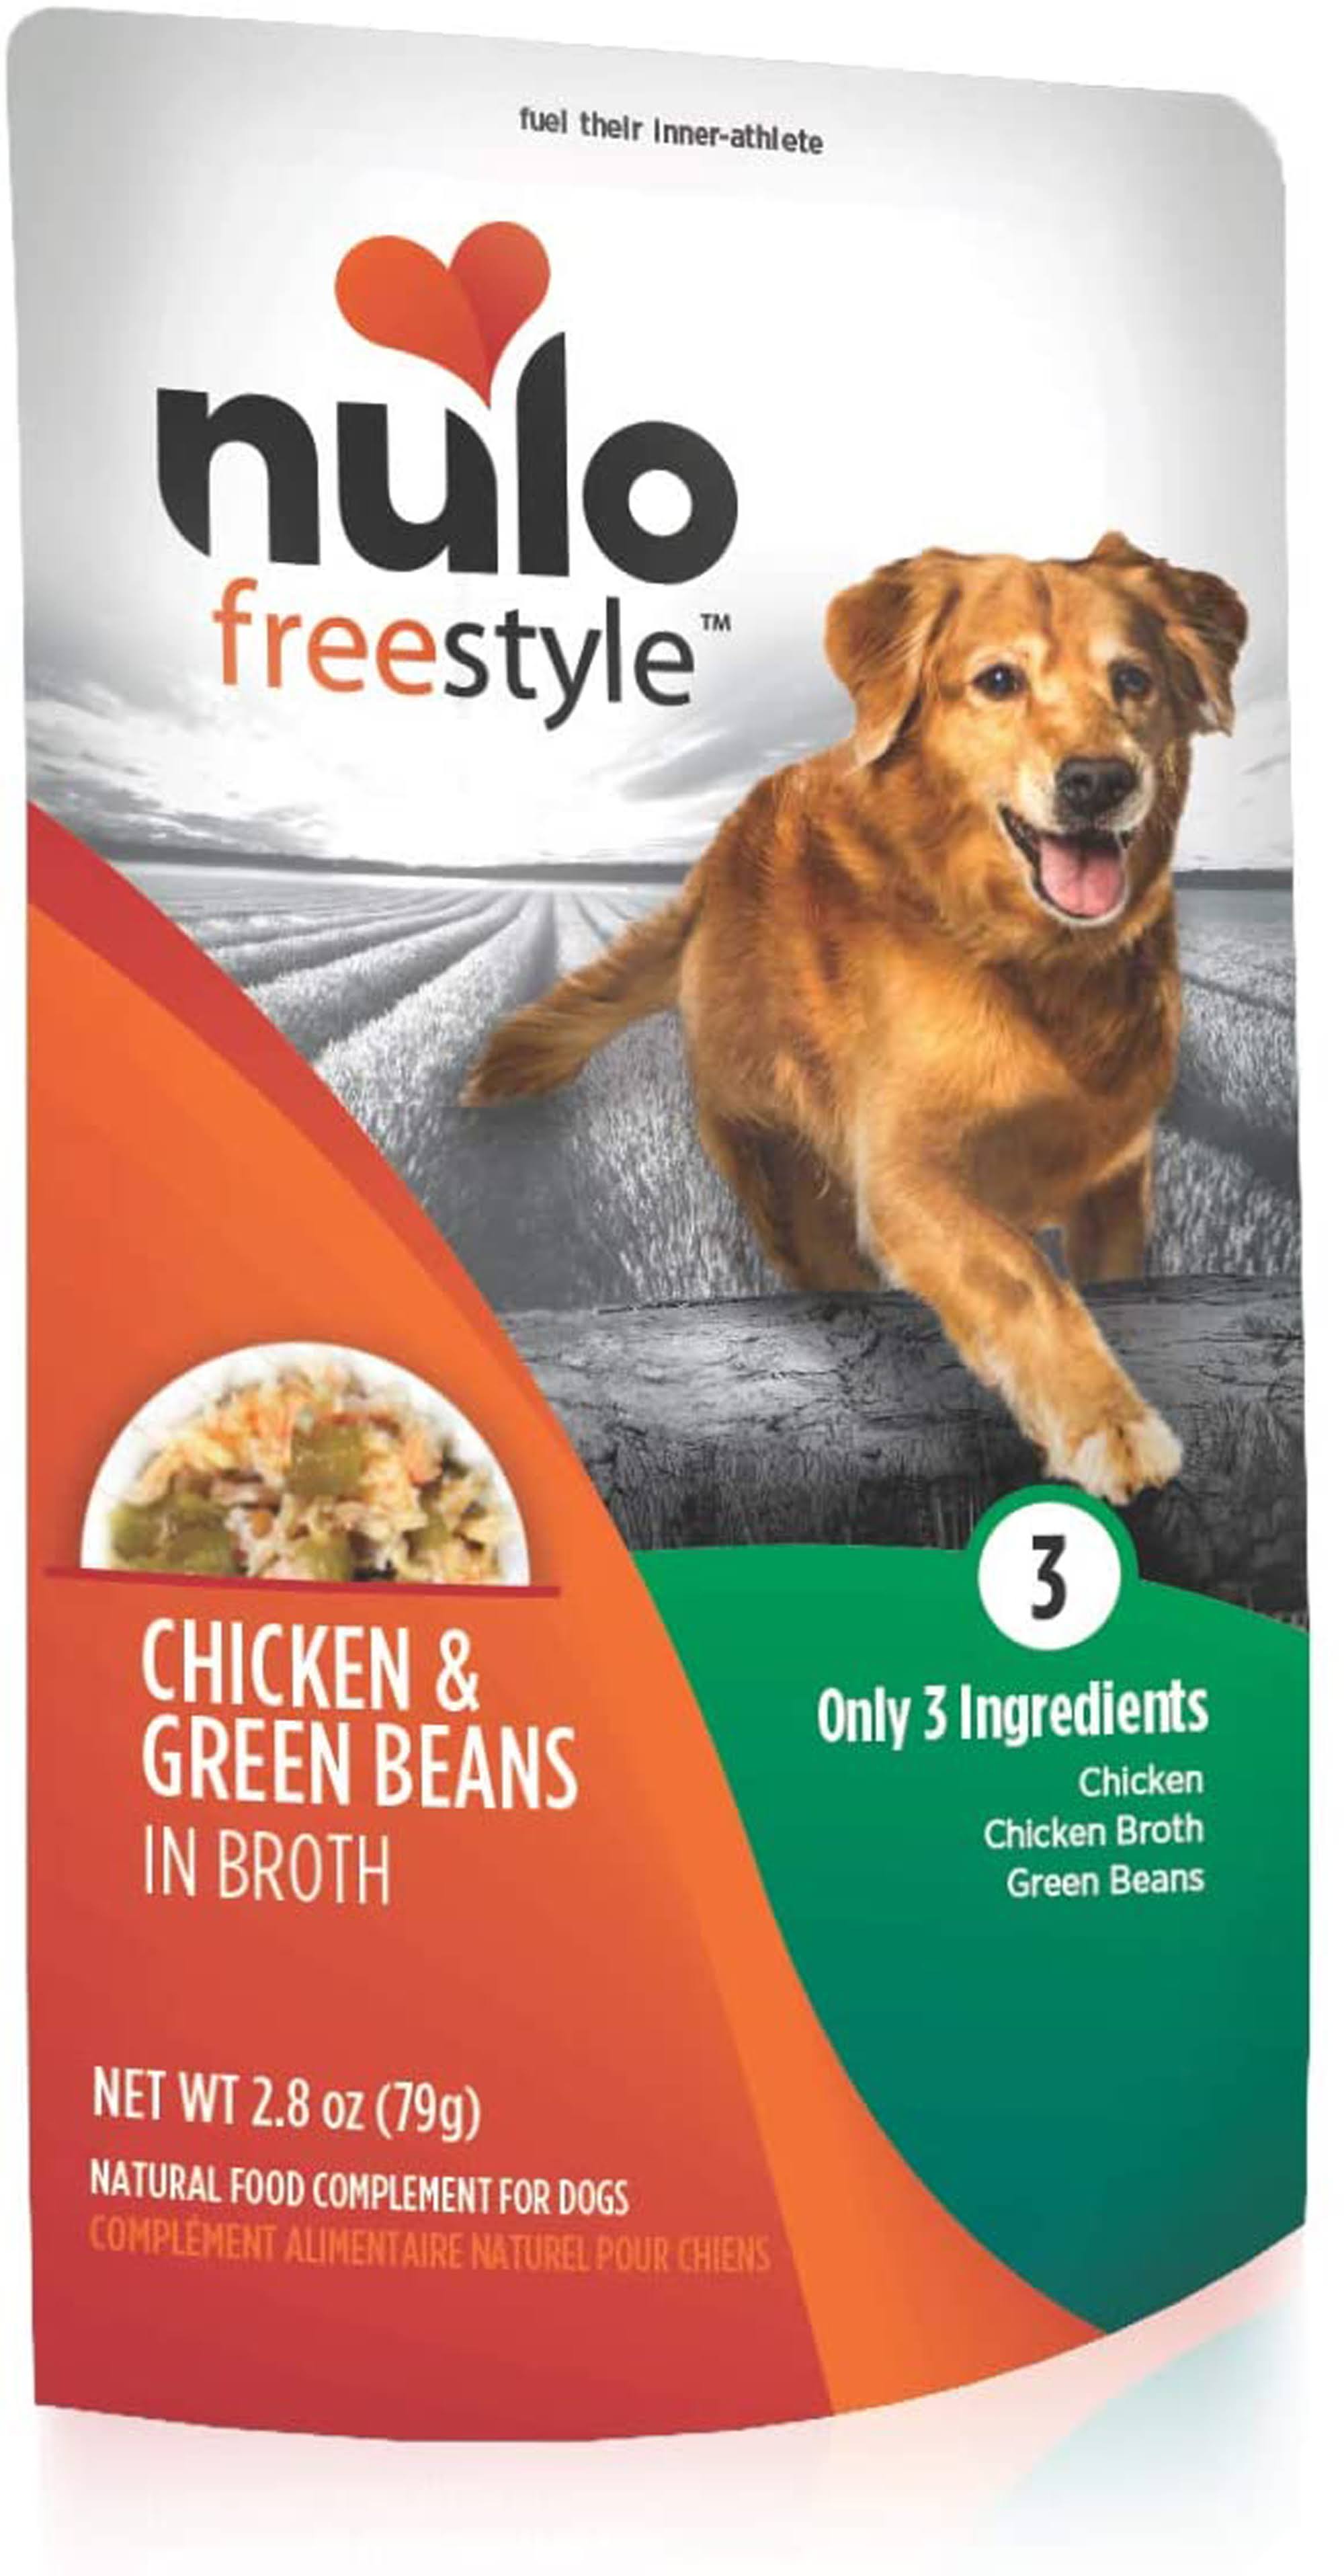 Nulo Freestyle Chicken & Green Beans in Broth Dog Food 2.8 oz